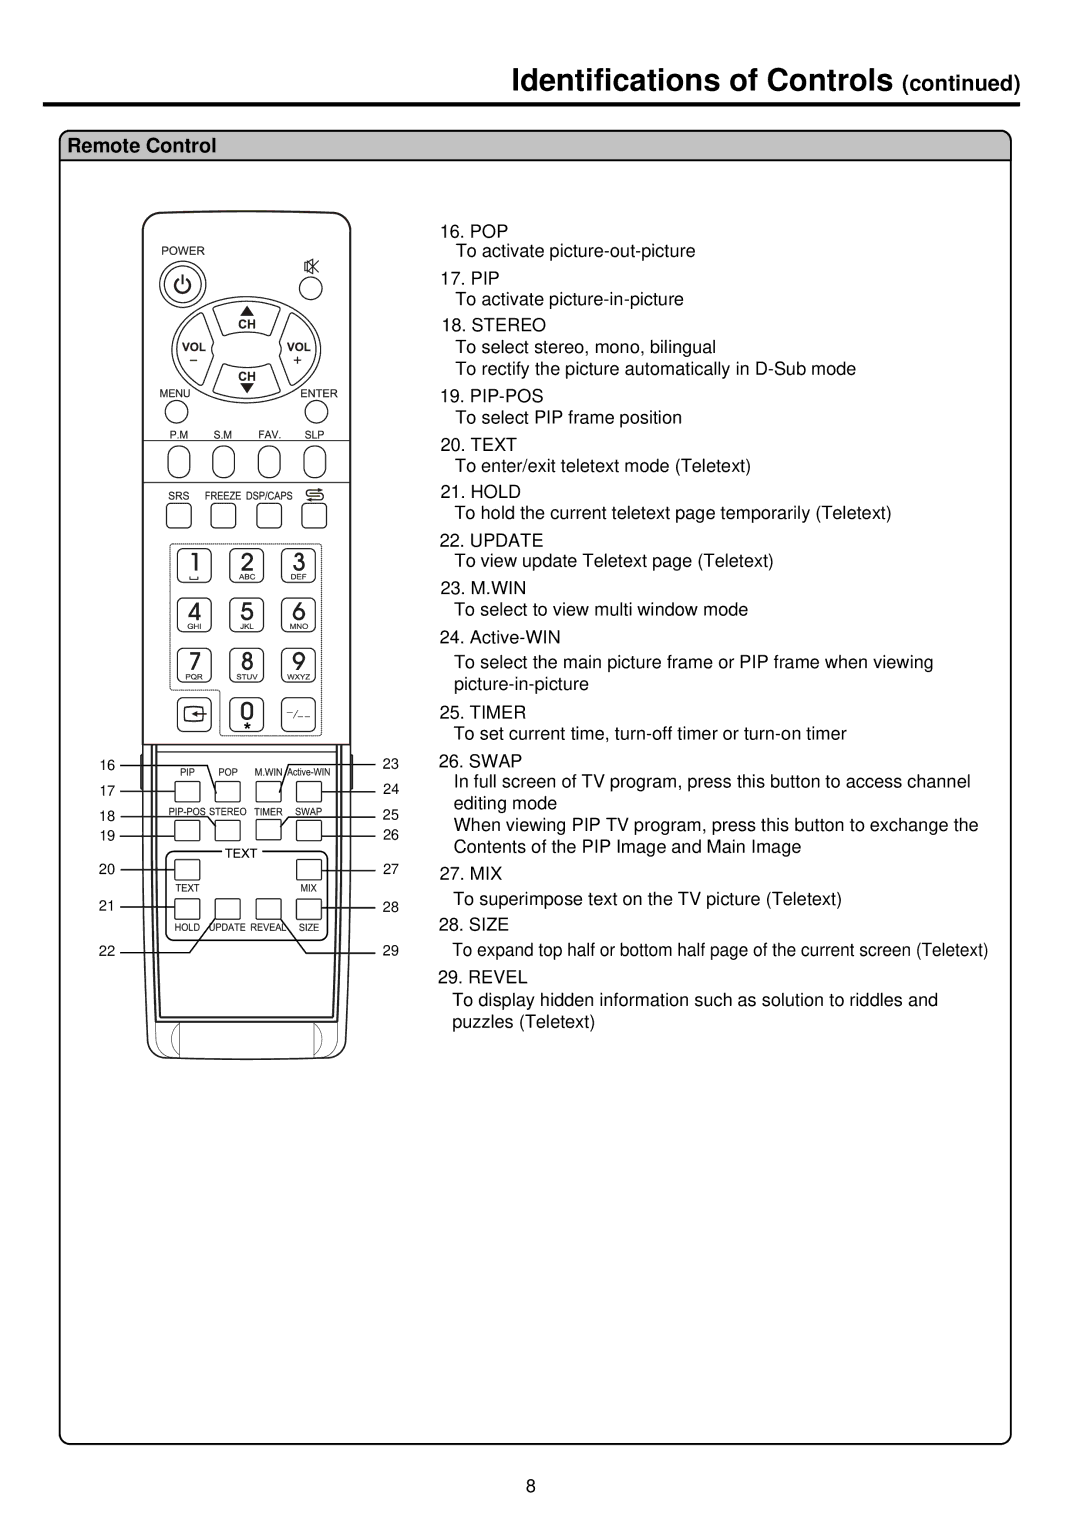 Palsonic TFTV680 owner manual Identifications of Controls, Pip-Pos 